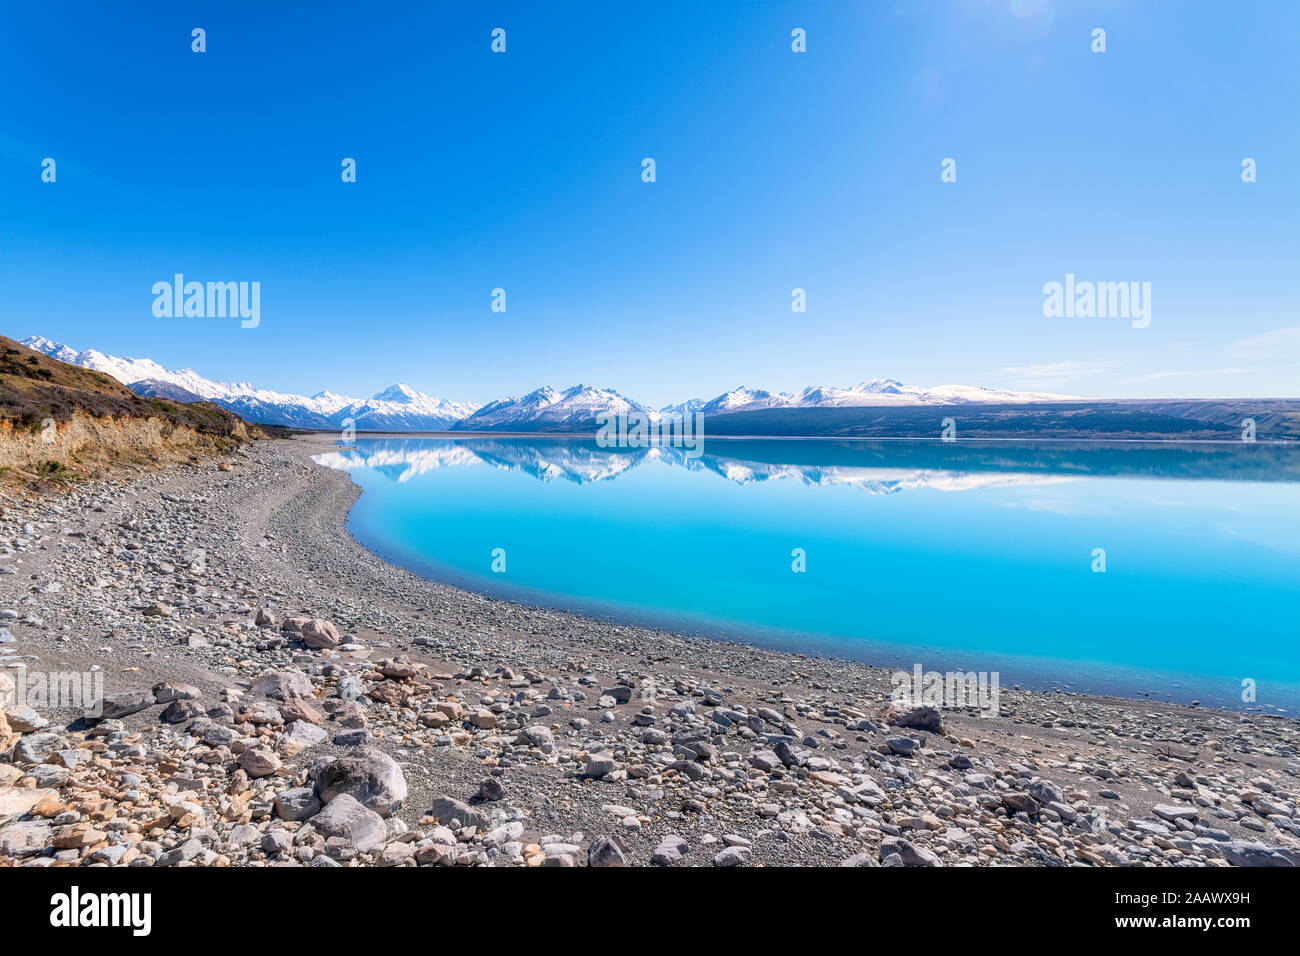 New Zealand, South Island, Clear sky over rocky shore of Lake Pukaki with mountains in background Stock Photo